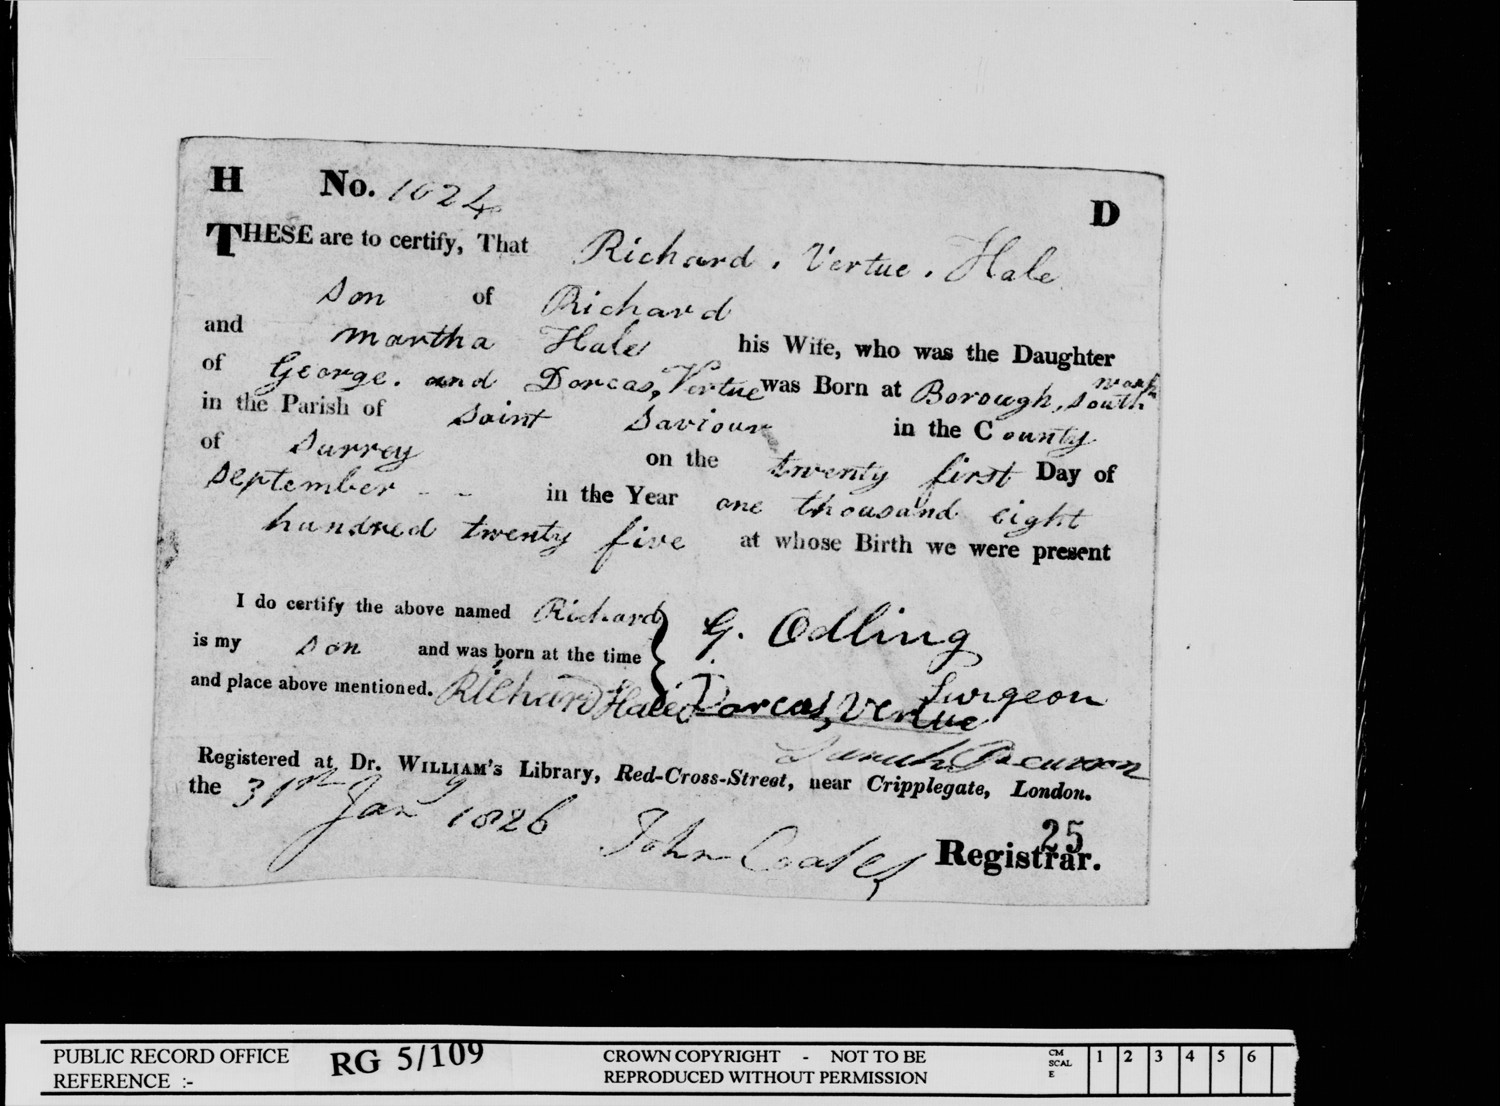 Birth record for Richard Vertue Hale, showing parents and maternal grand parents